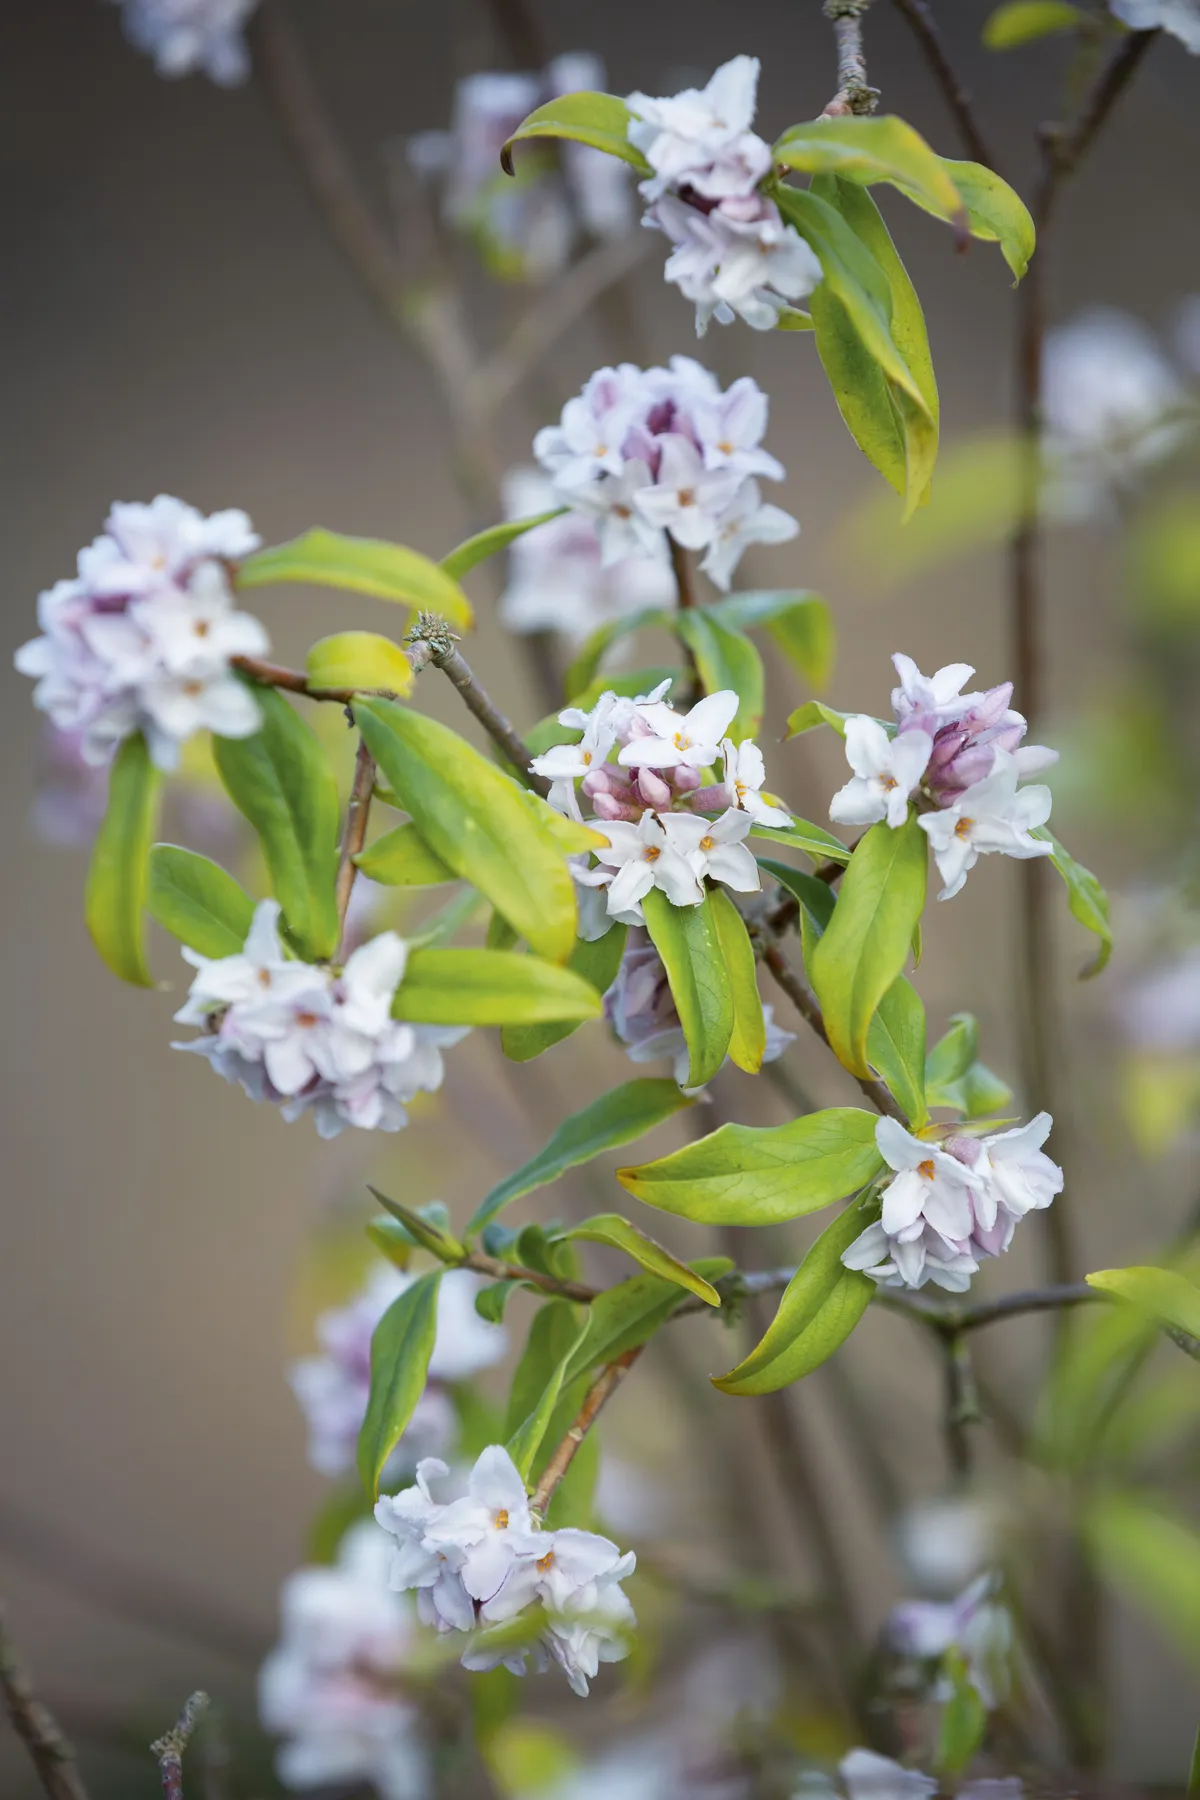 Daphne bholua 10 Daphne bholua A beautiful shrub with semi-evergreen foliage and heavily scented, star-shaped, A beautiful shrub with semi-evergreen foliage and heavily scented, star-shaped pinkish white pinkish-white flowers in late winter. 3m x 1.5m. RHS H4.